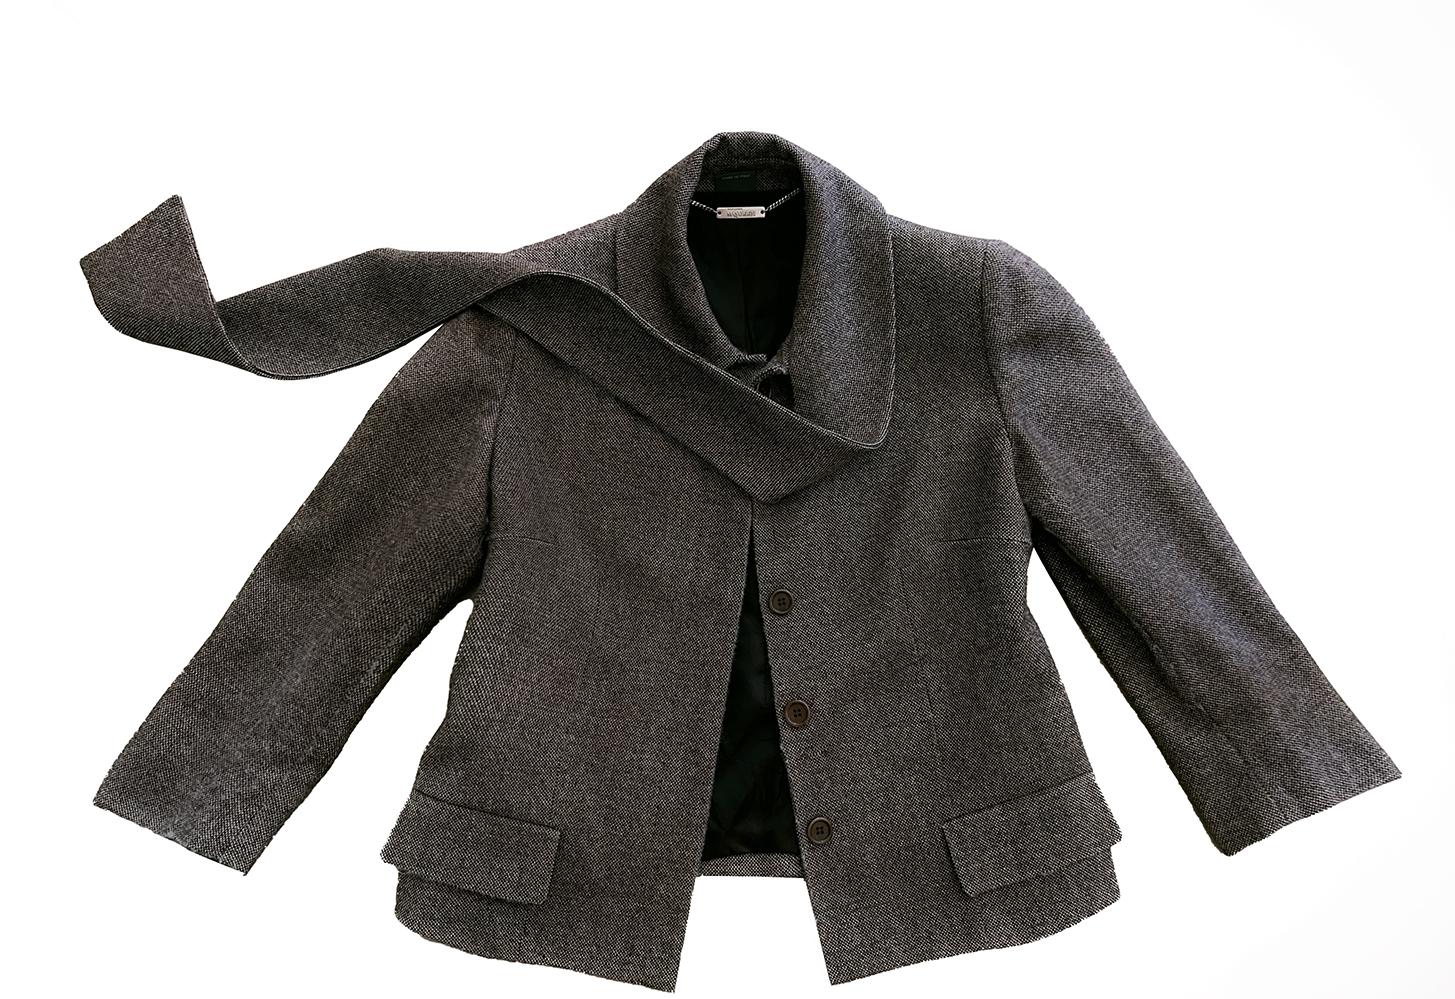 Alexander McQueen Archival FW 2005 'The Man Who Knew Too Much' Wool Skirt Suit For Sale 14